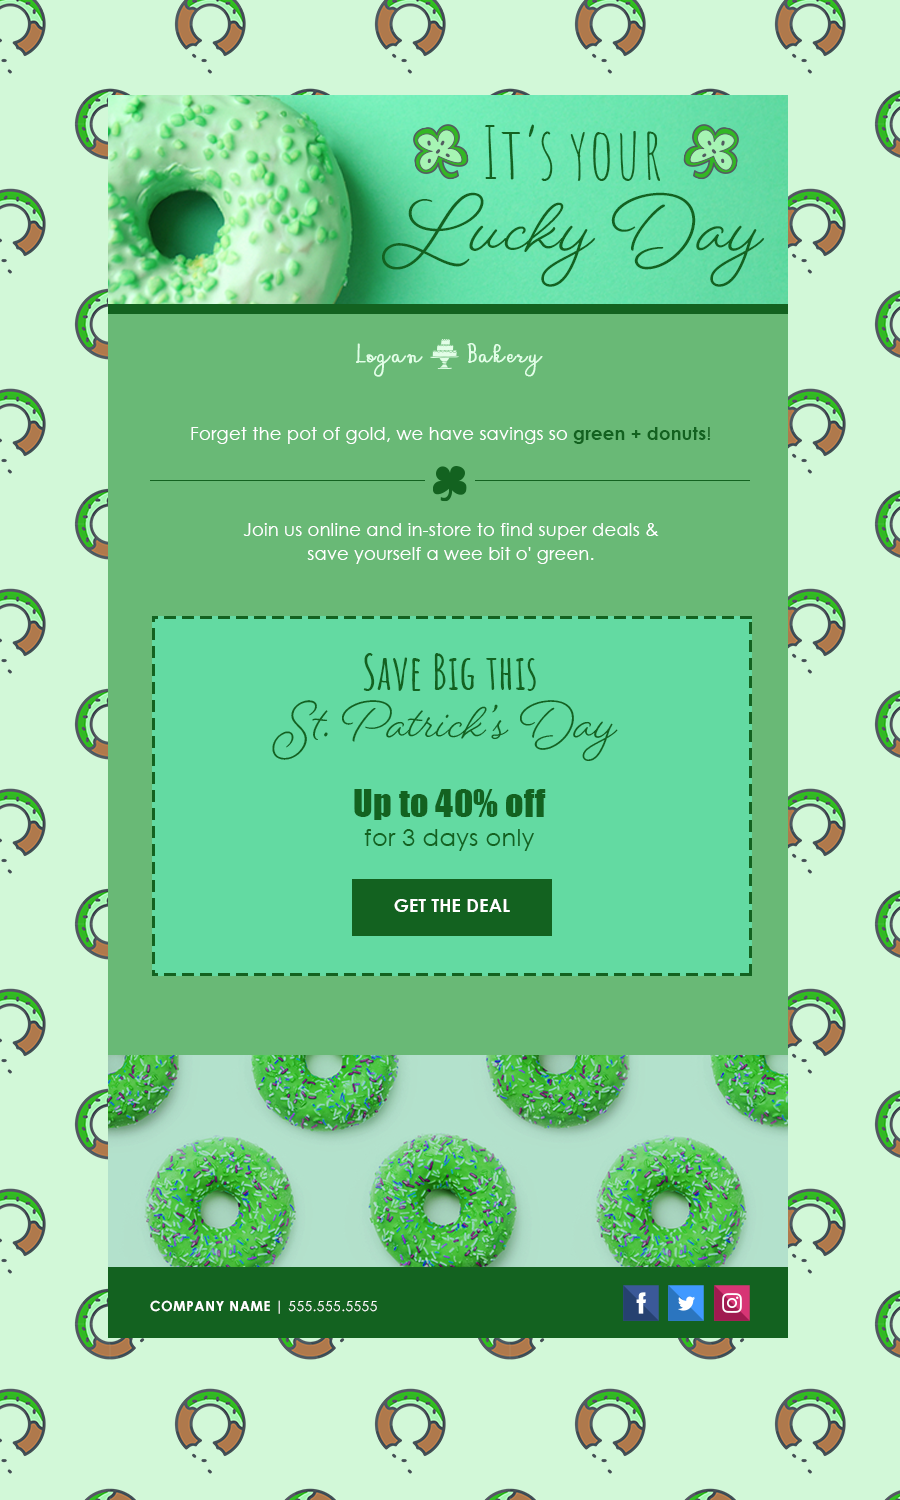 St Patrick's Day coupon email template